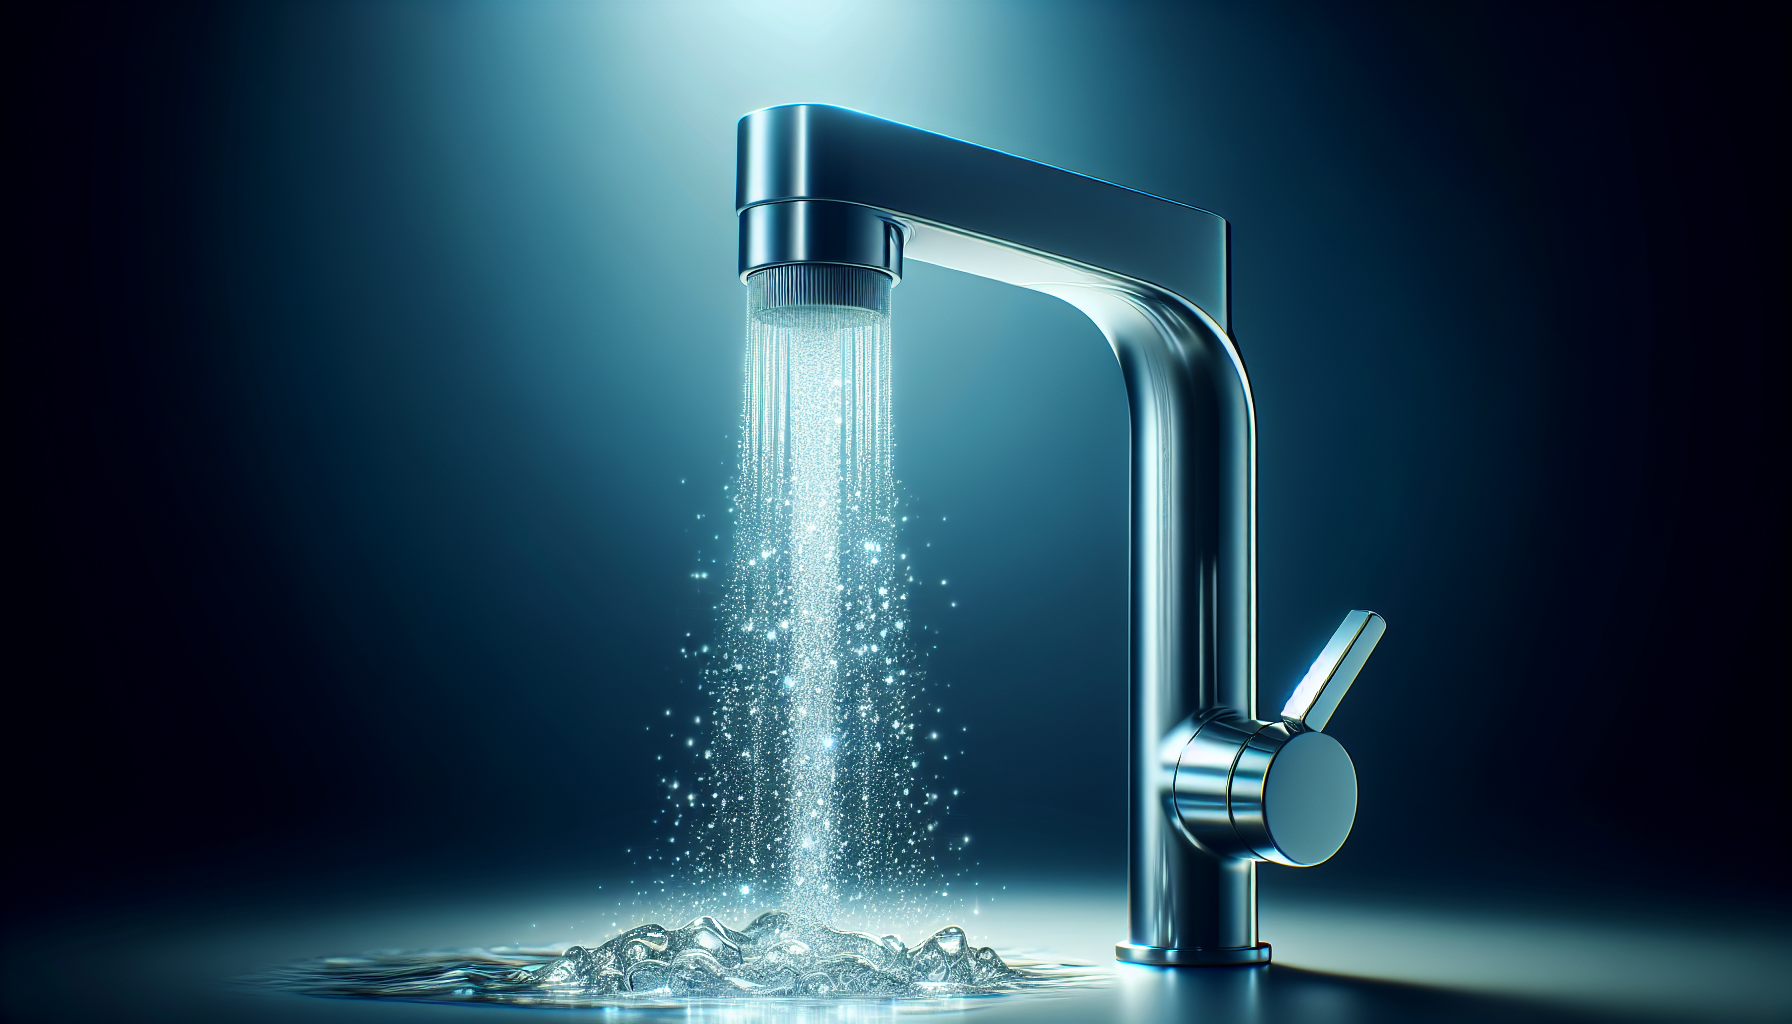 Illustration of a faucet with clean, filtered water flowing from it